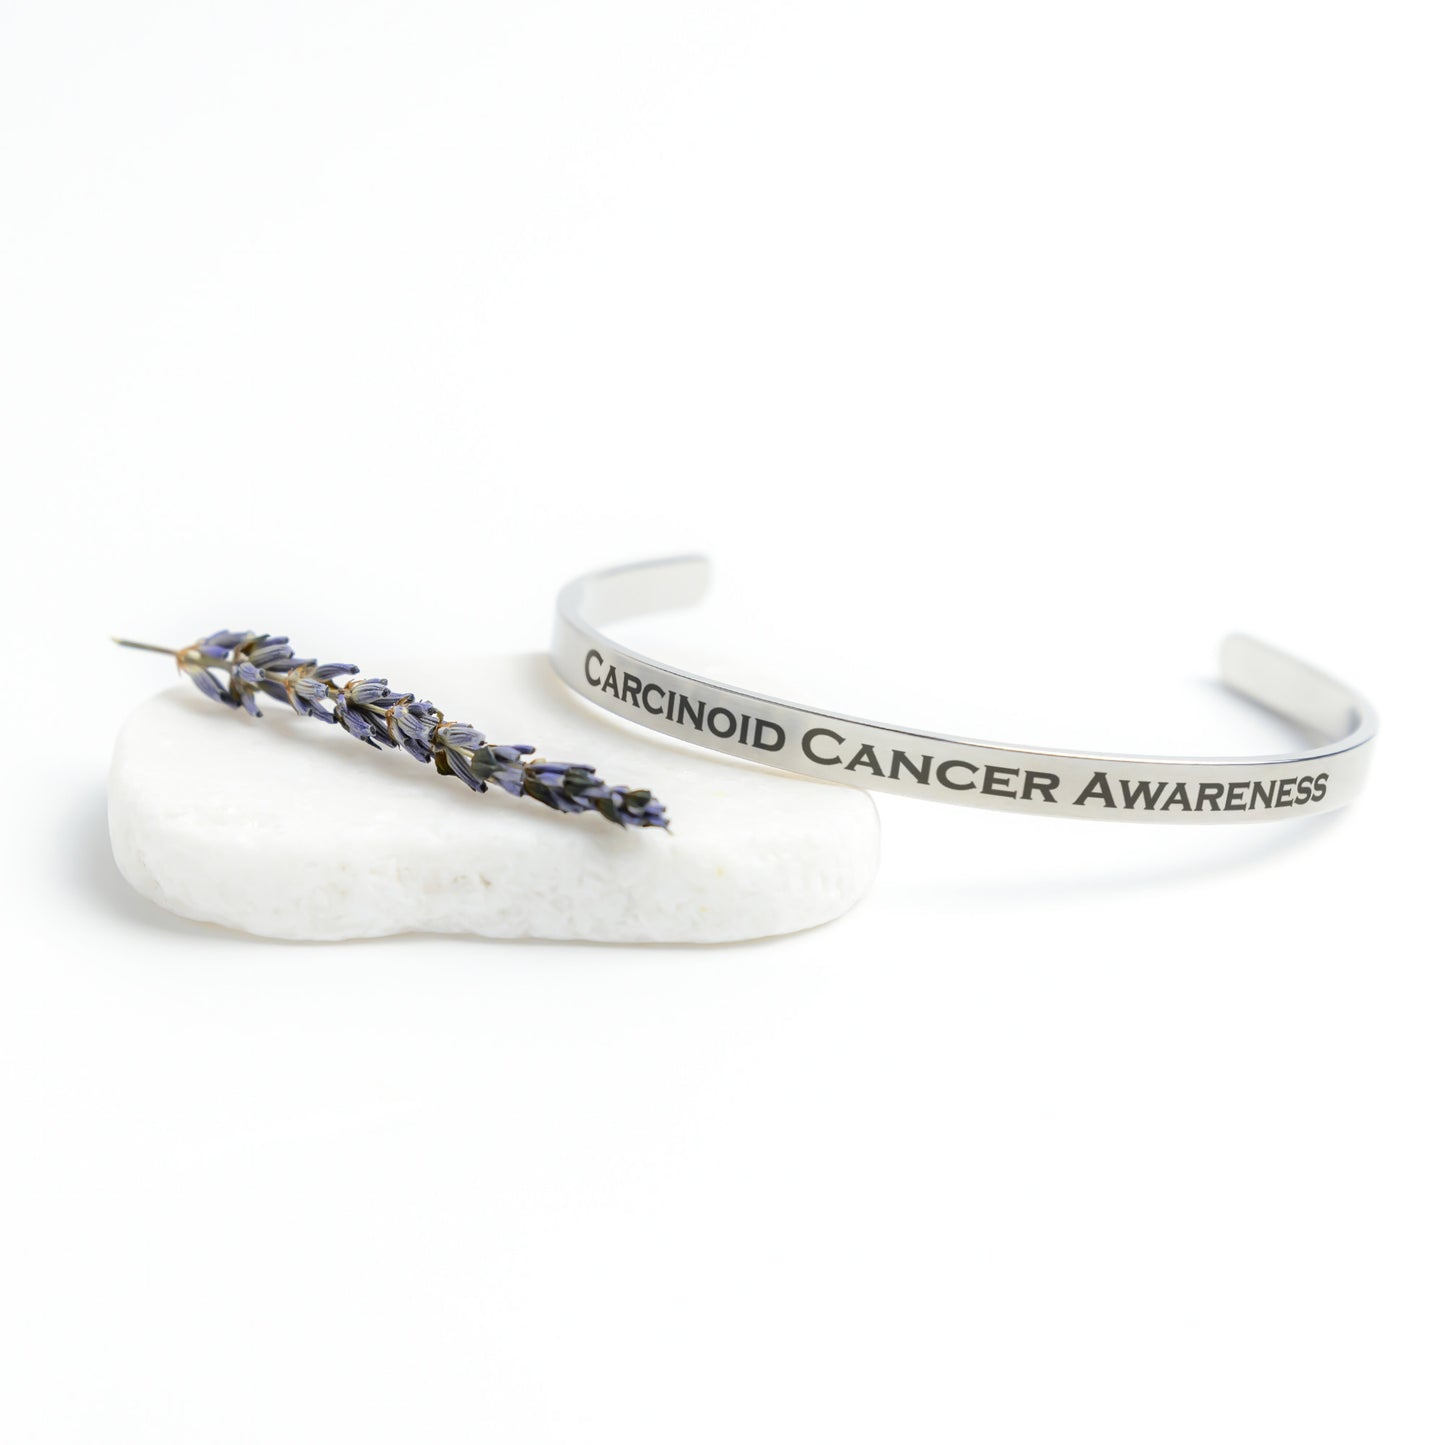 Personalized Carcinoid Cancer Awareness Cuff Bracelet